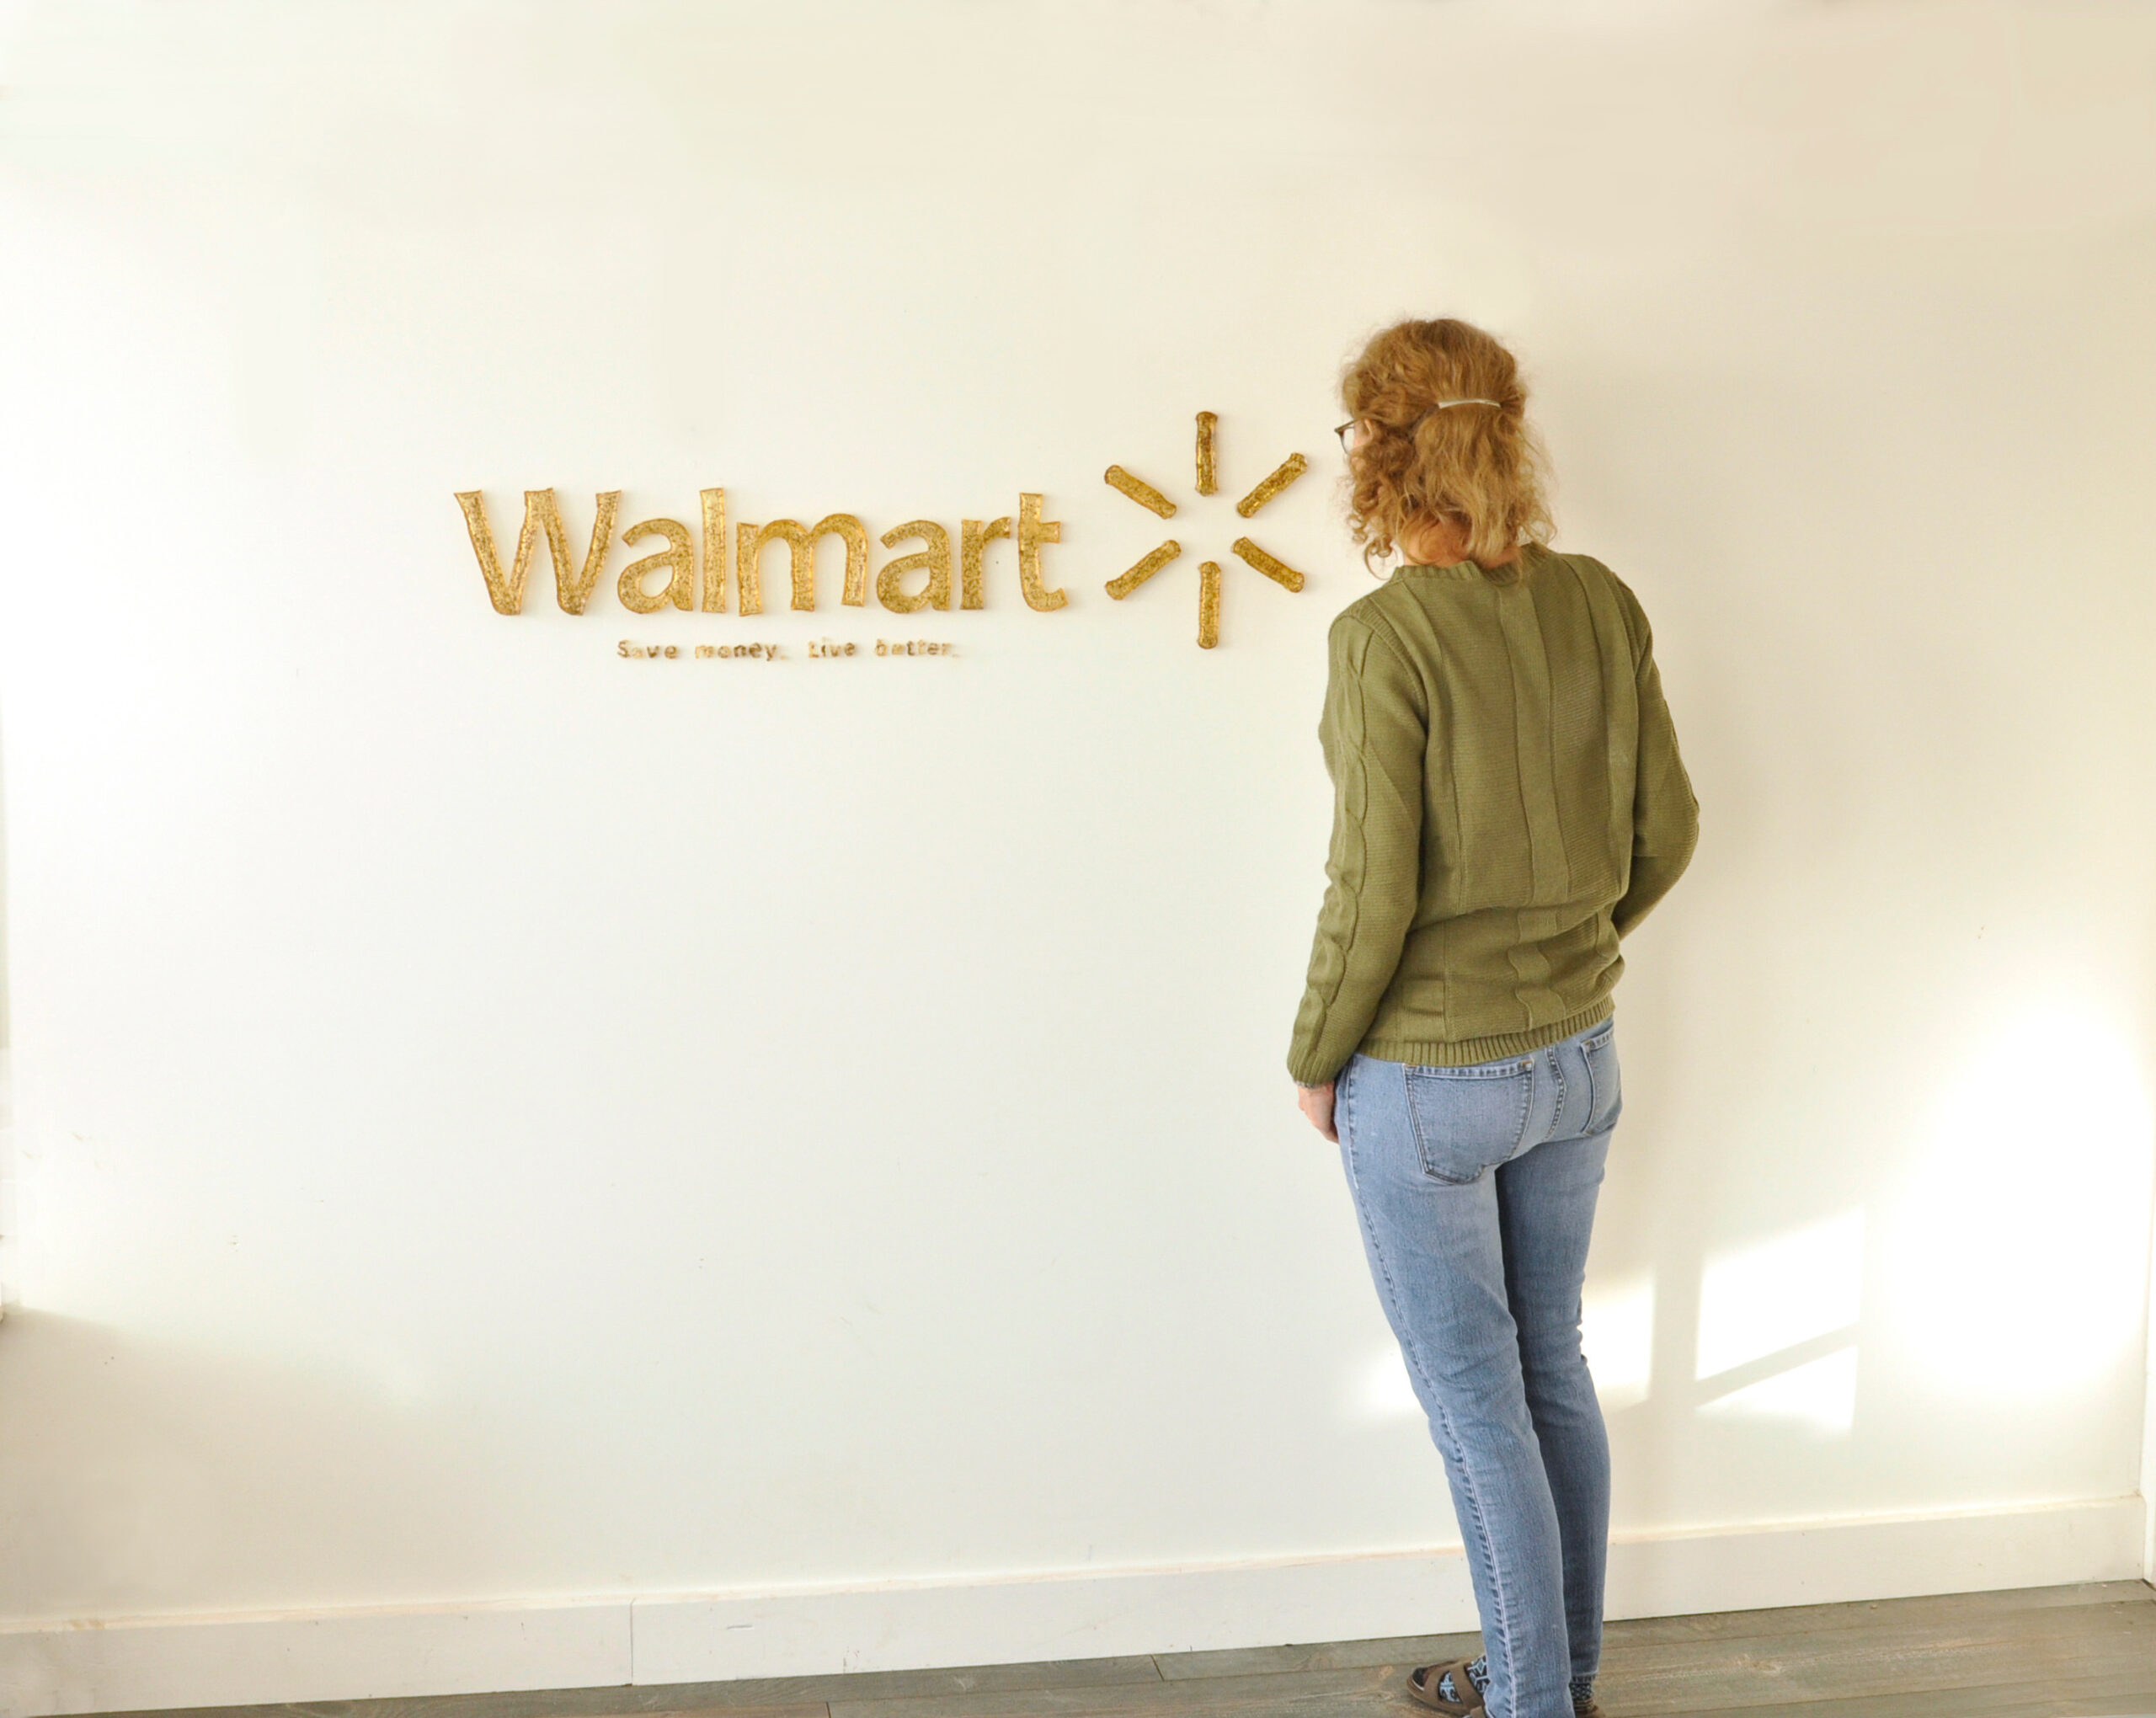 artist standing beside sculpture mounted on a wall, the Walmart logo with slogan Save money. Live Better